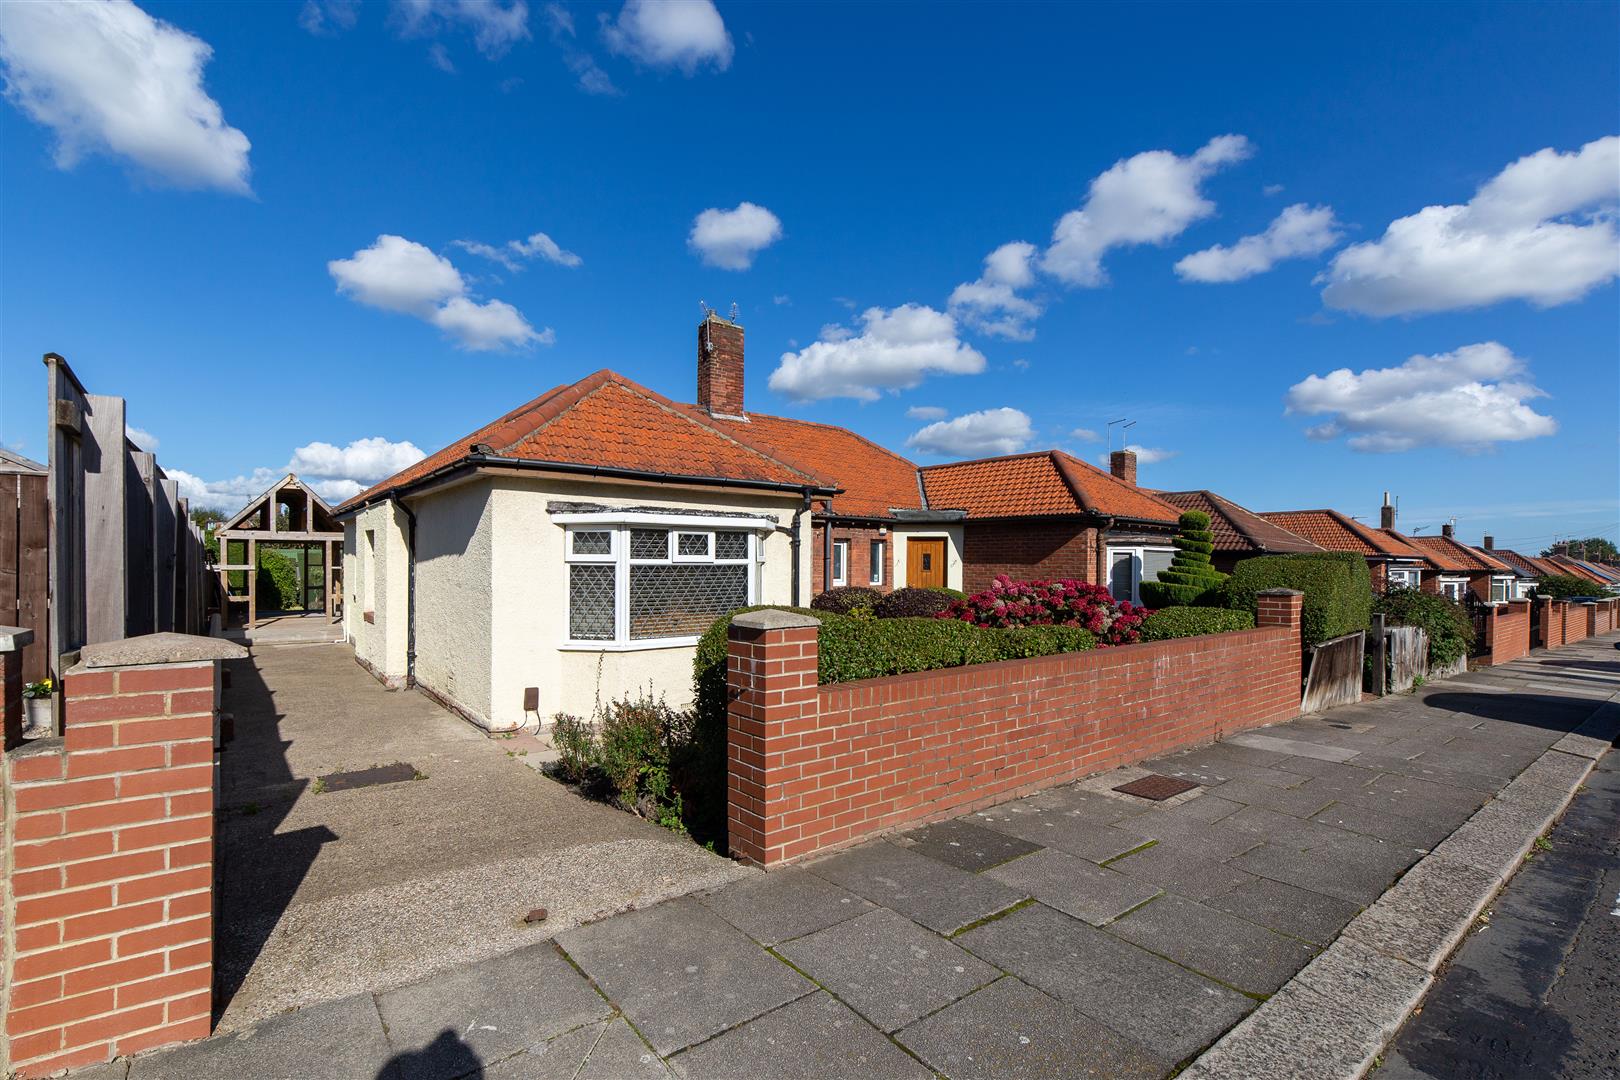 2 bed semi-detached bungalow to rent in Sackville Road, Heaton - Property Image 1